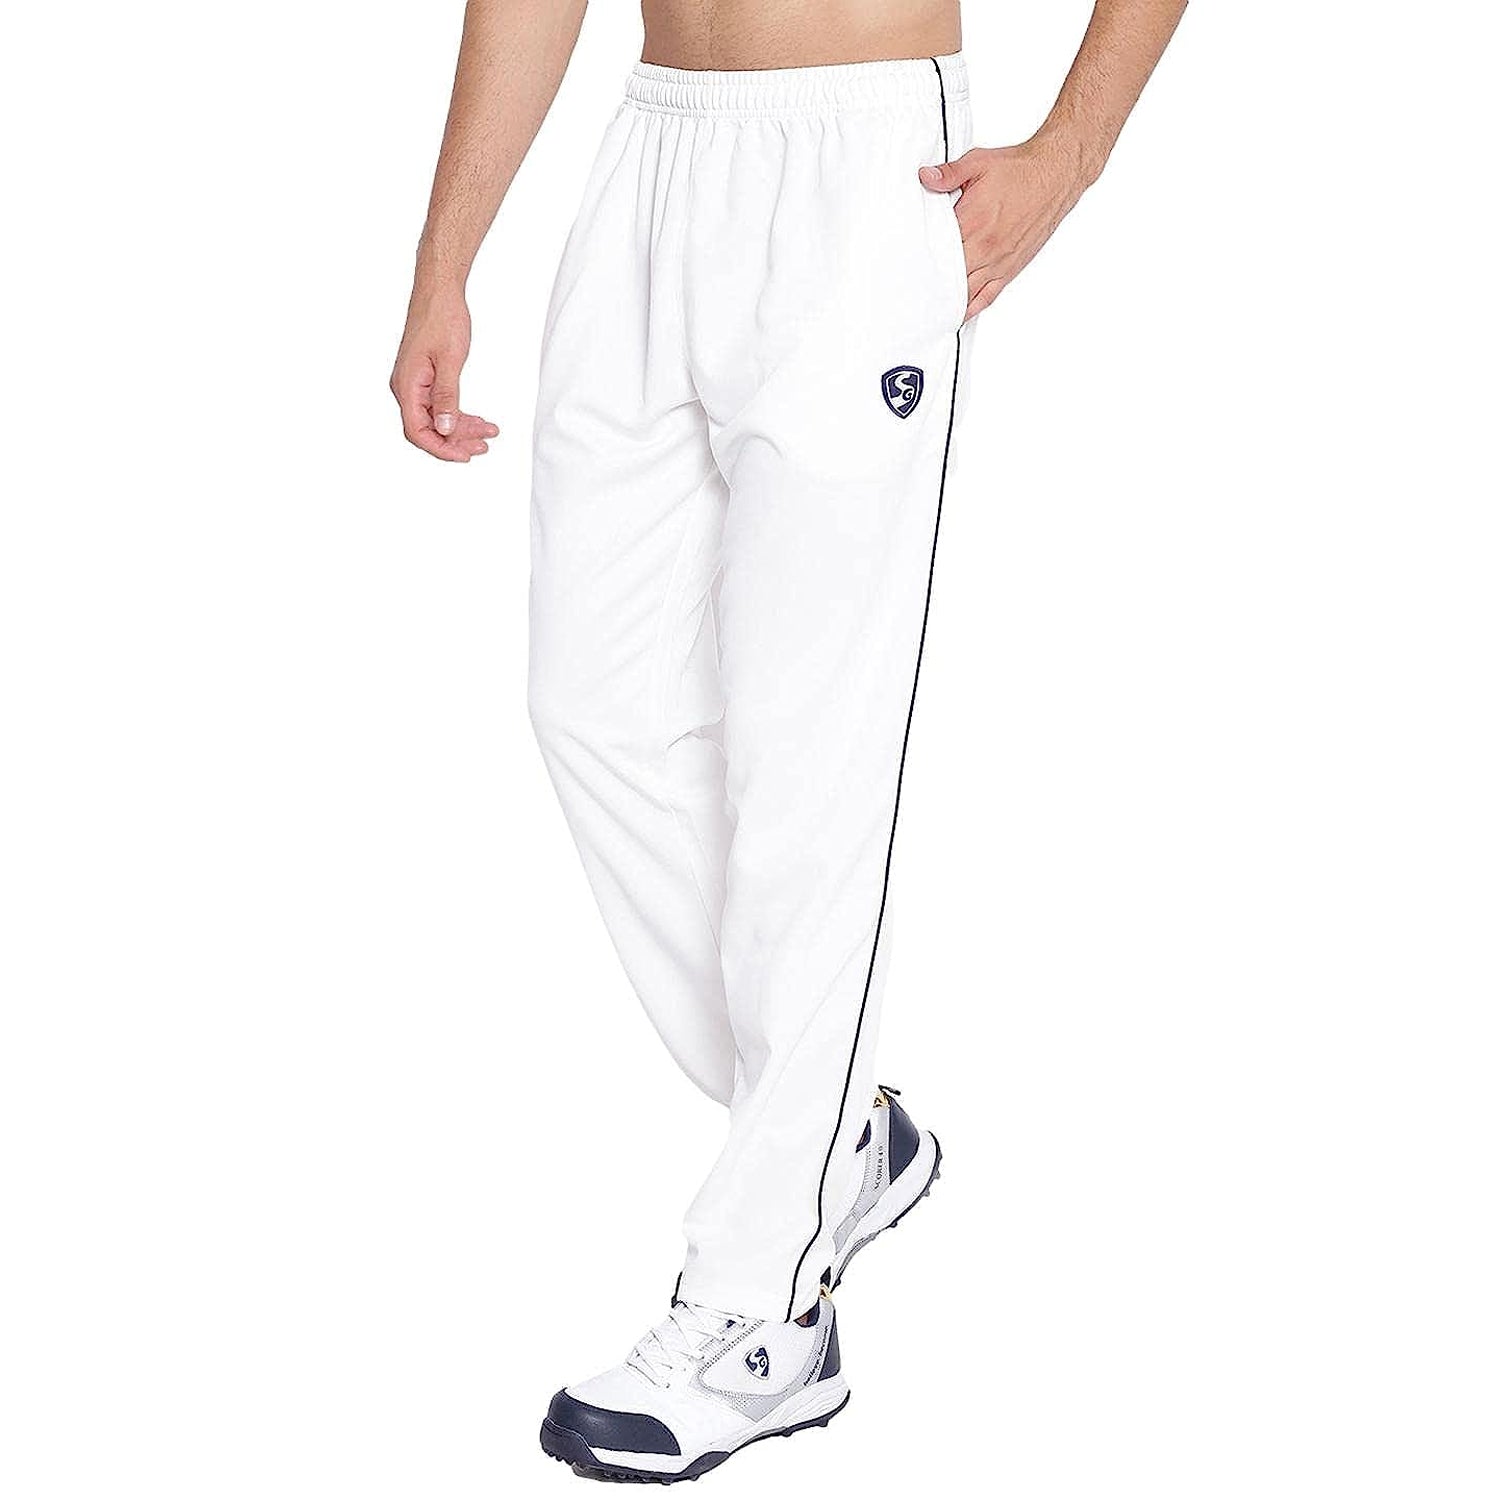 GM 7130 Cricket Trouser SizeSmall WhiteNavy  Amazonin Clothing   Accessories